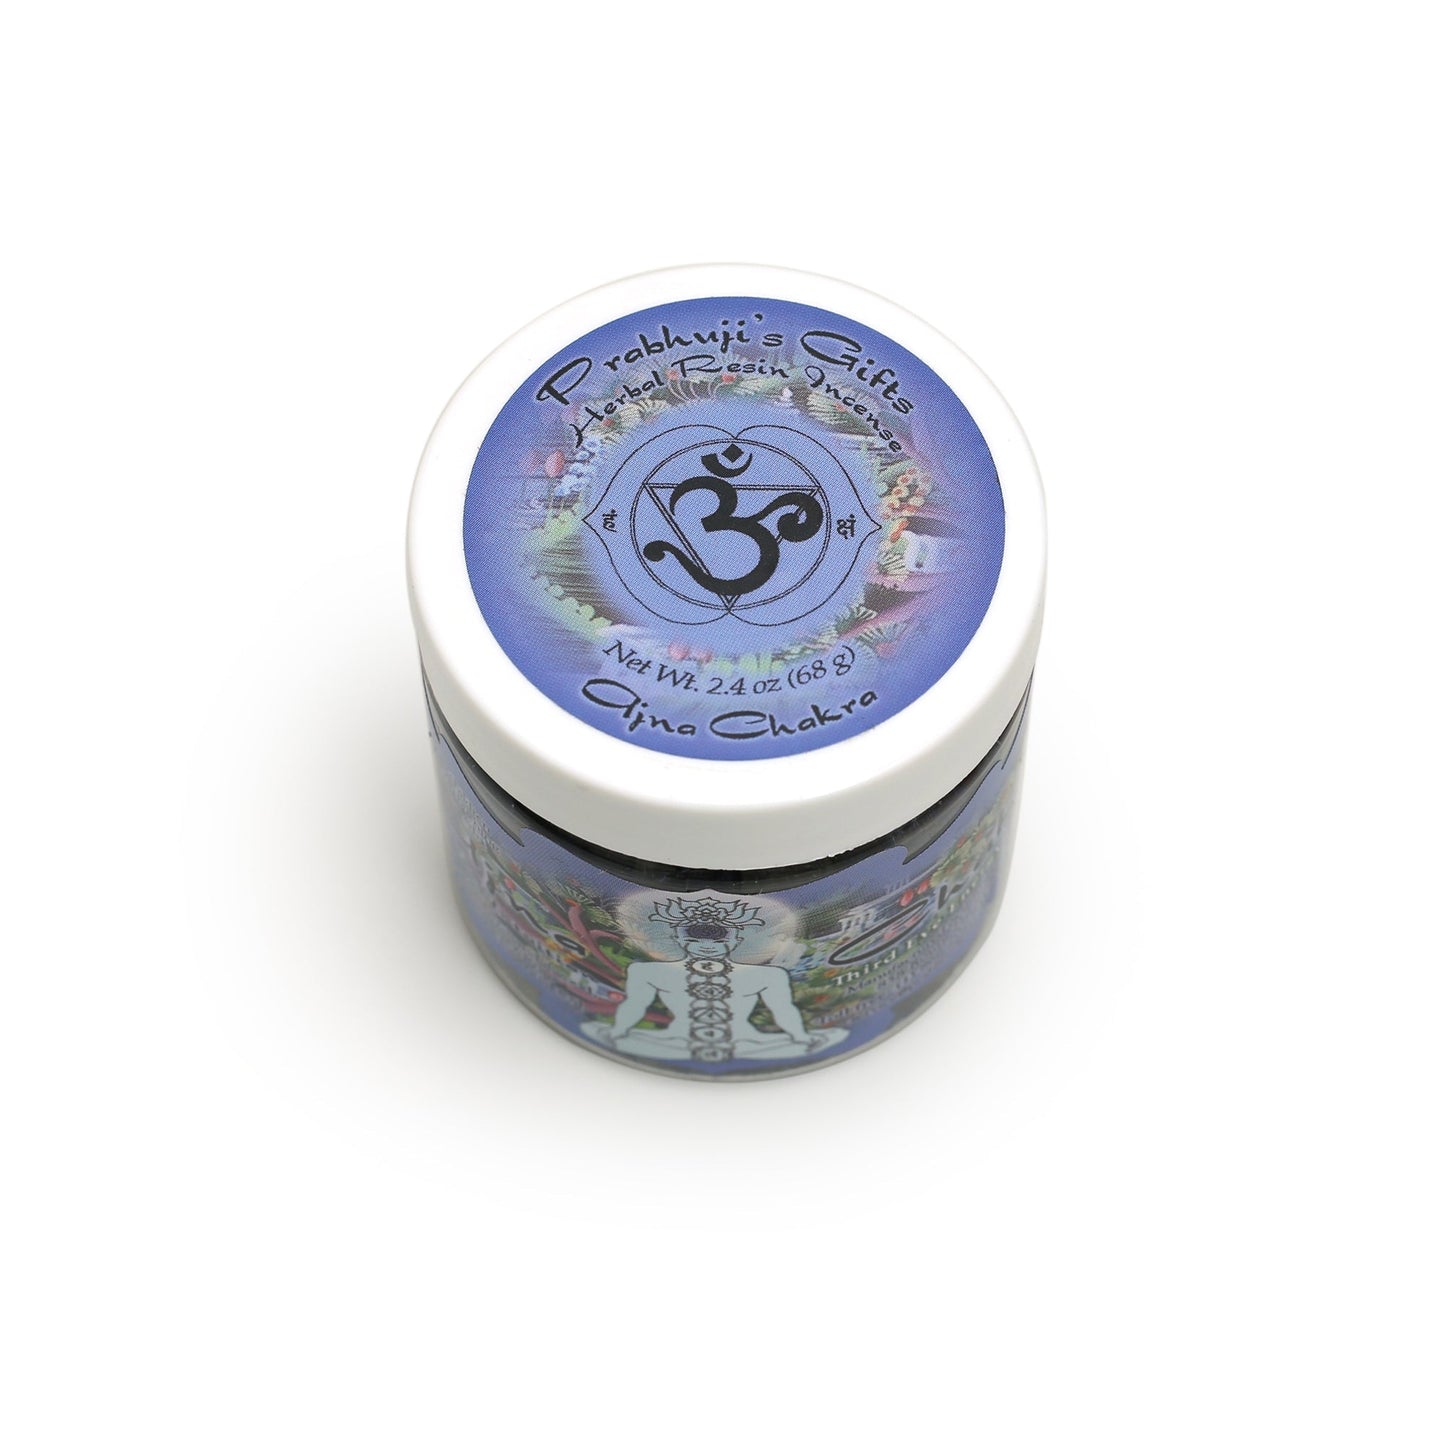 Resin Incense Third Eye Chakra Ajna - Concentration and Intuition - 2.4oz jar - Tree Spirit Wellness